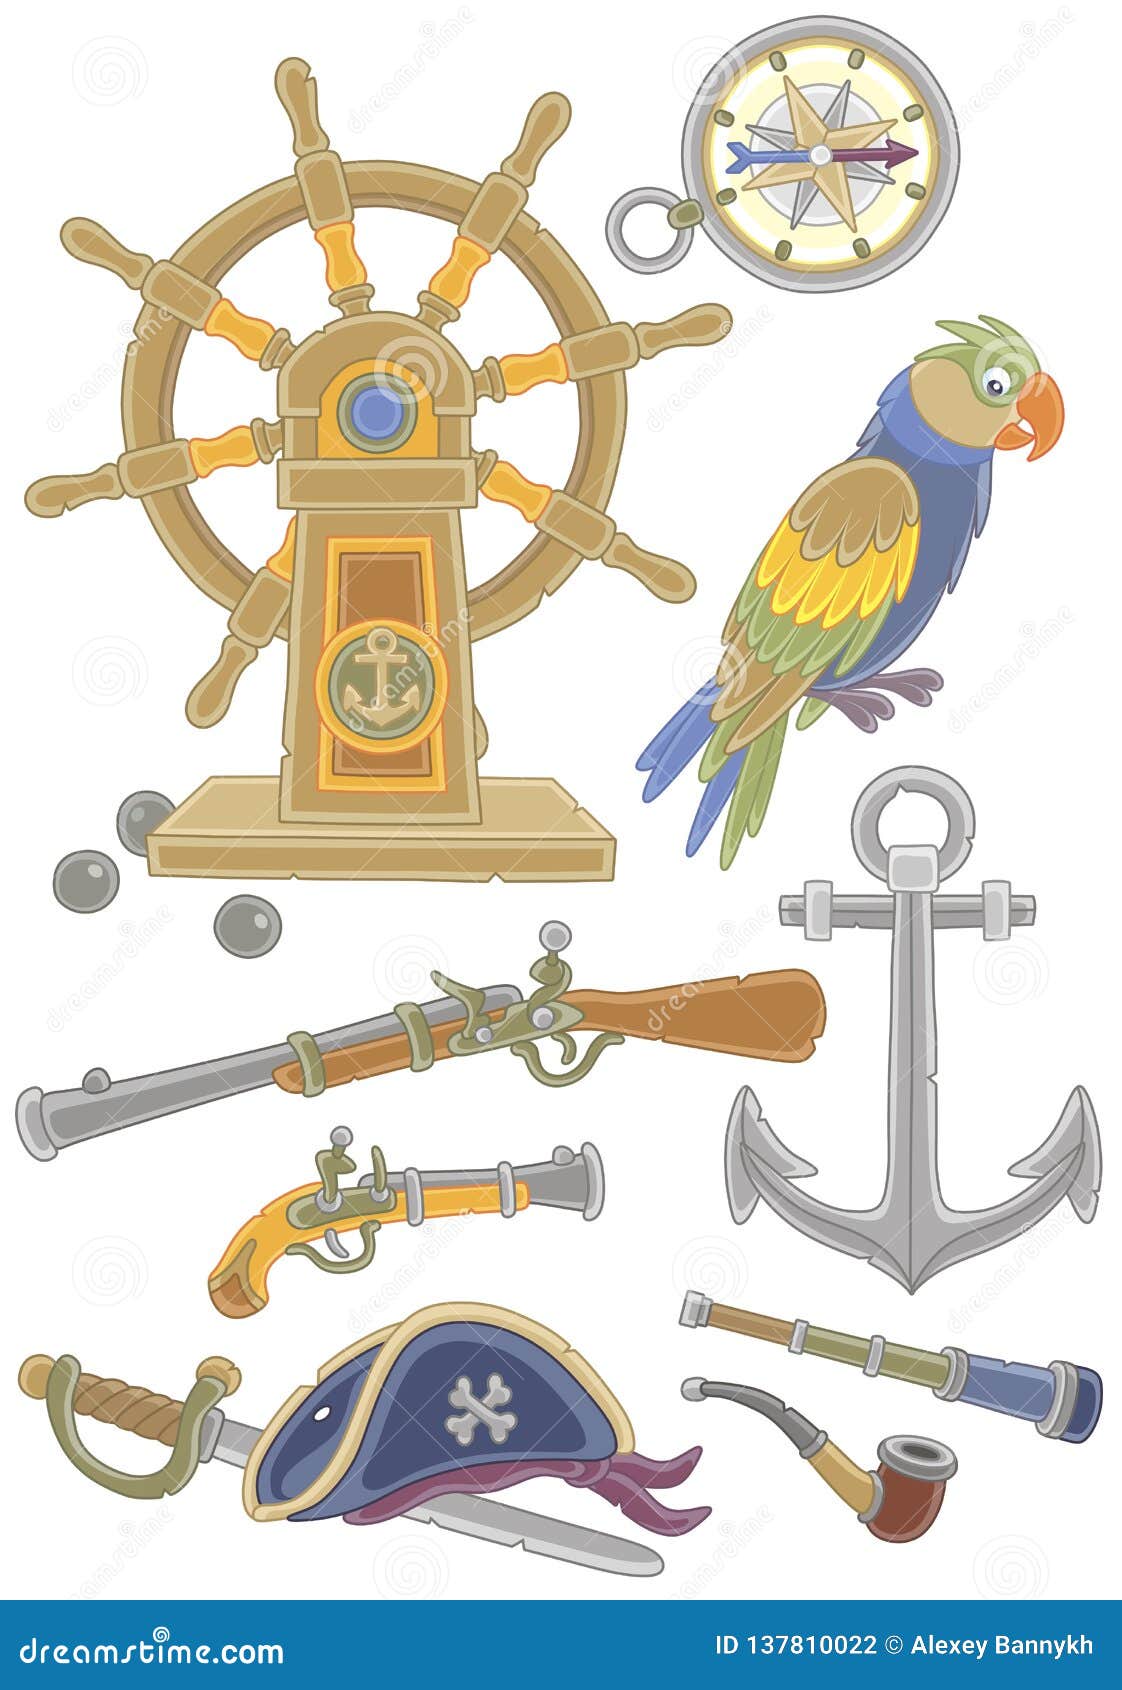 Collection of Old Pirate Weapons and Things Stock Vector - Illustration of  helm, cartoony: 137810022